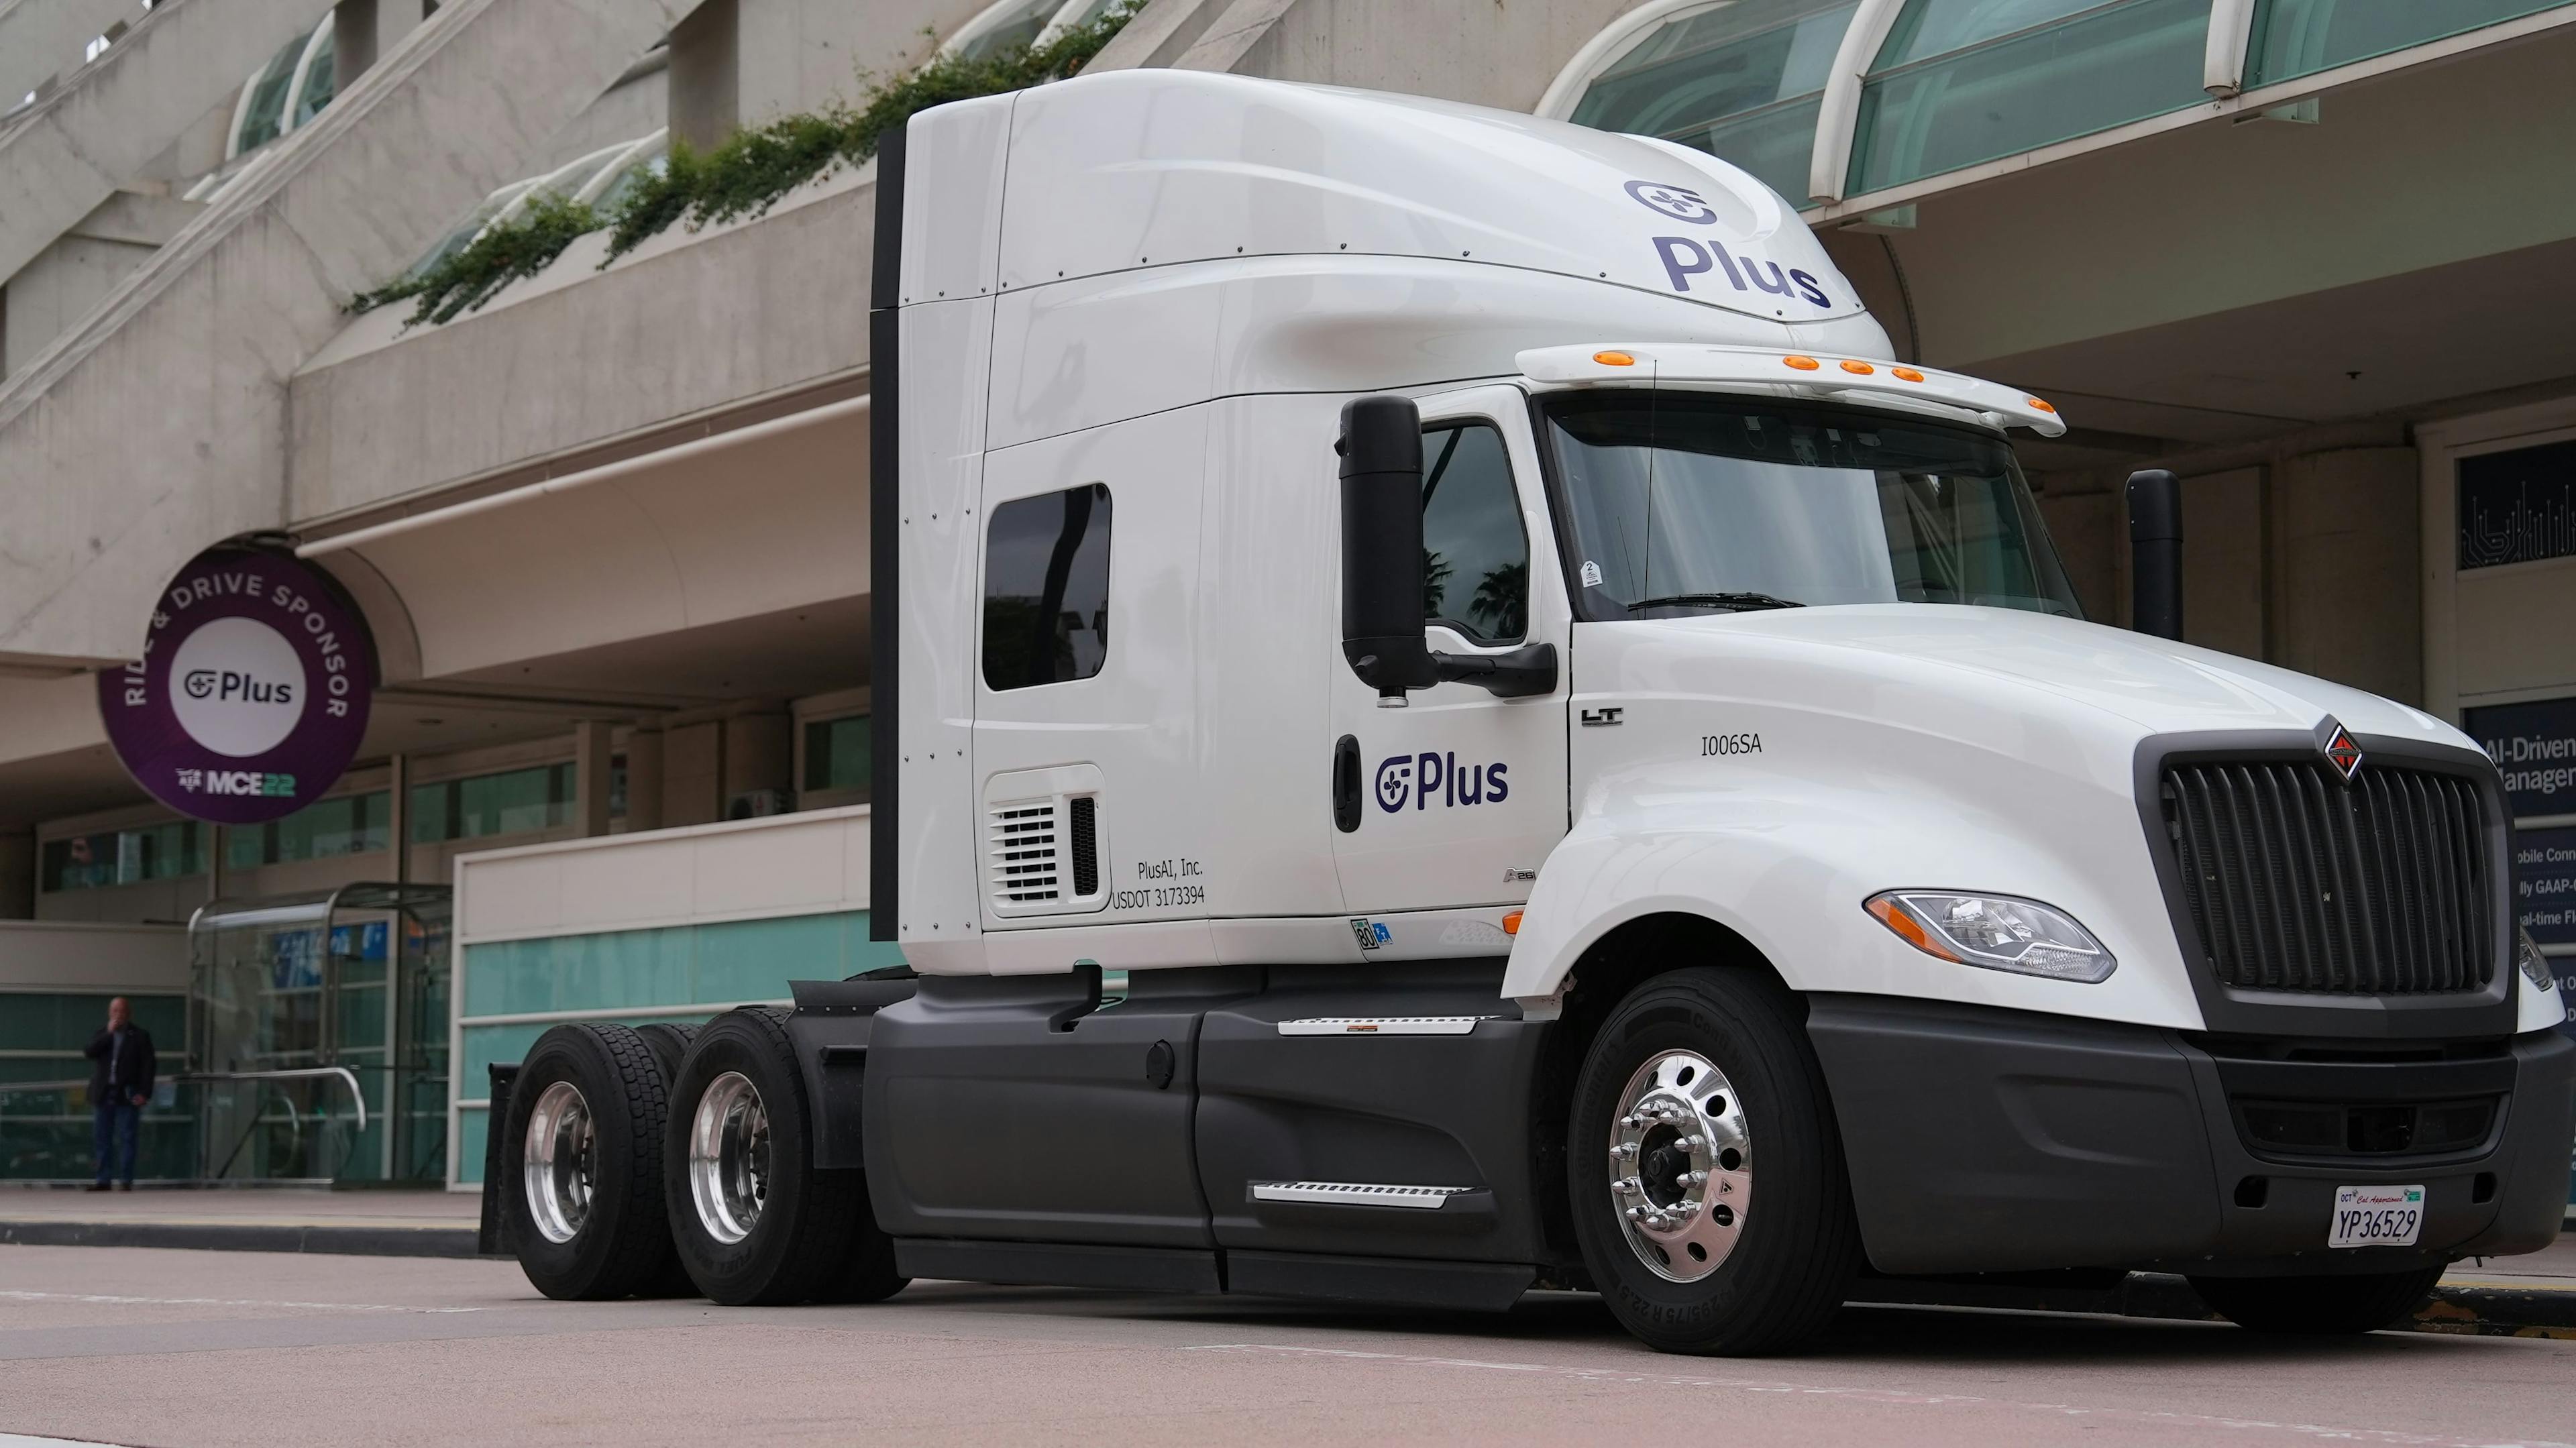 PlusDrive Powered Highly Automated Truck at 2022 MCE, San Diego